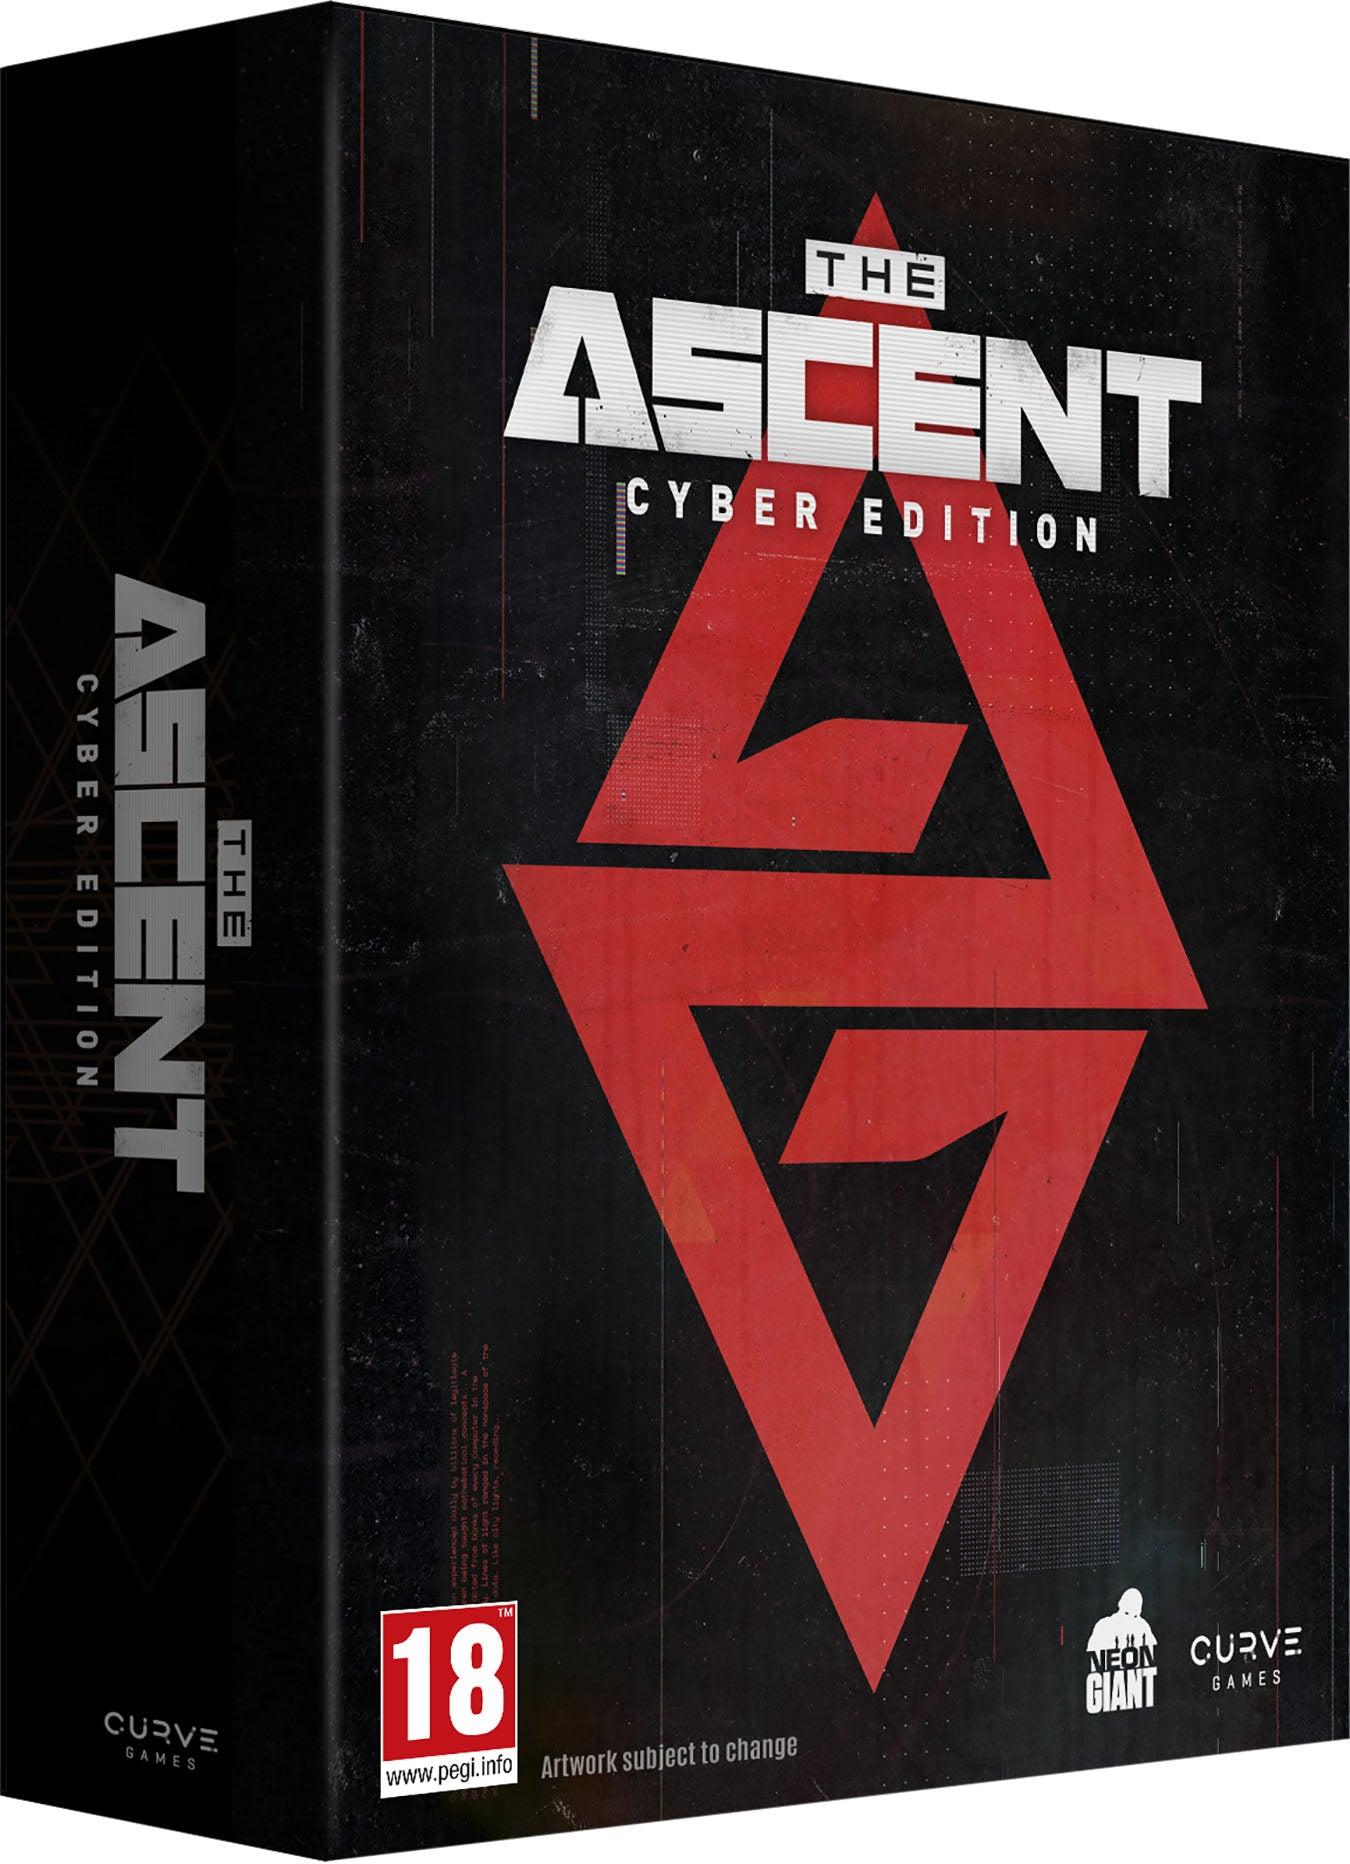 Image of The Ascent Cyber Edition